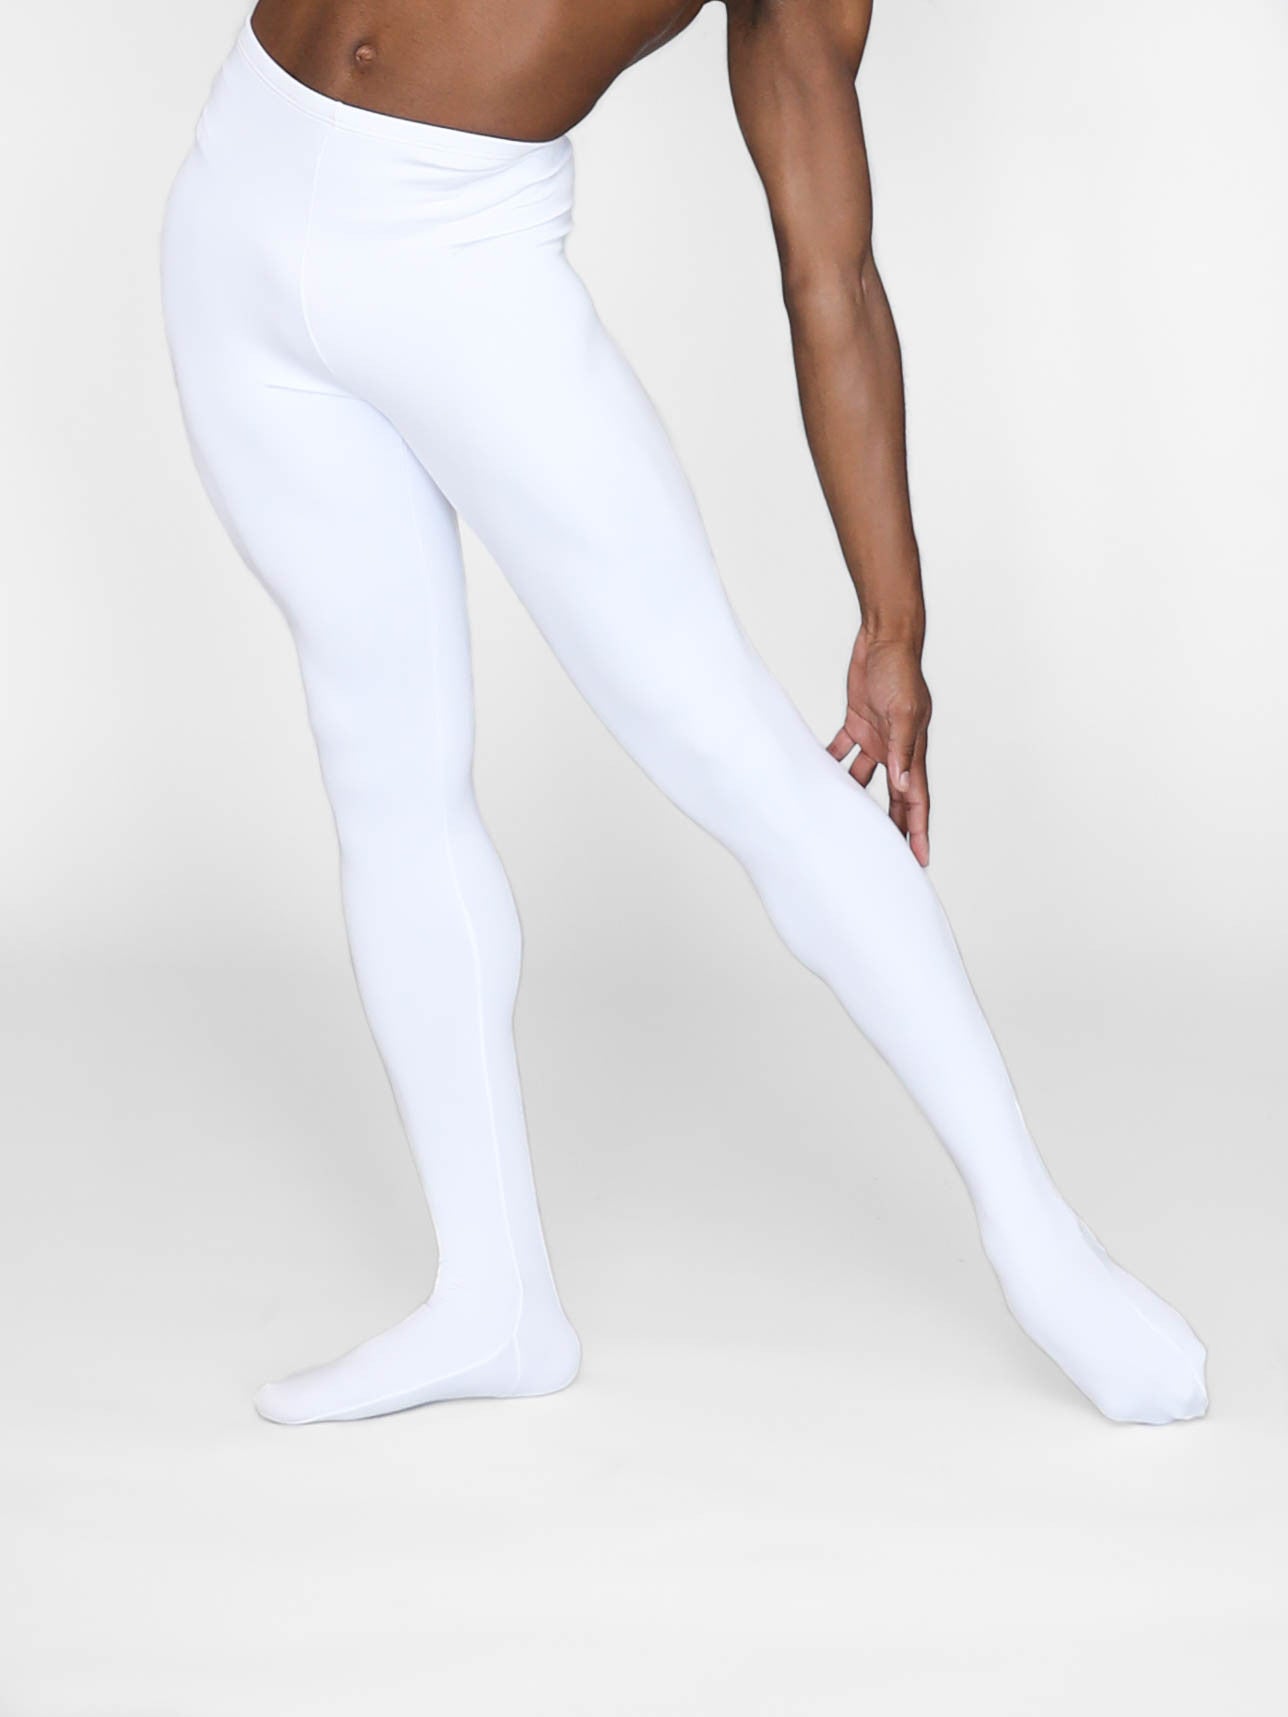 Opaque white dance tights for men by boysdancetoo the dance store for men